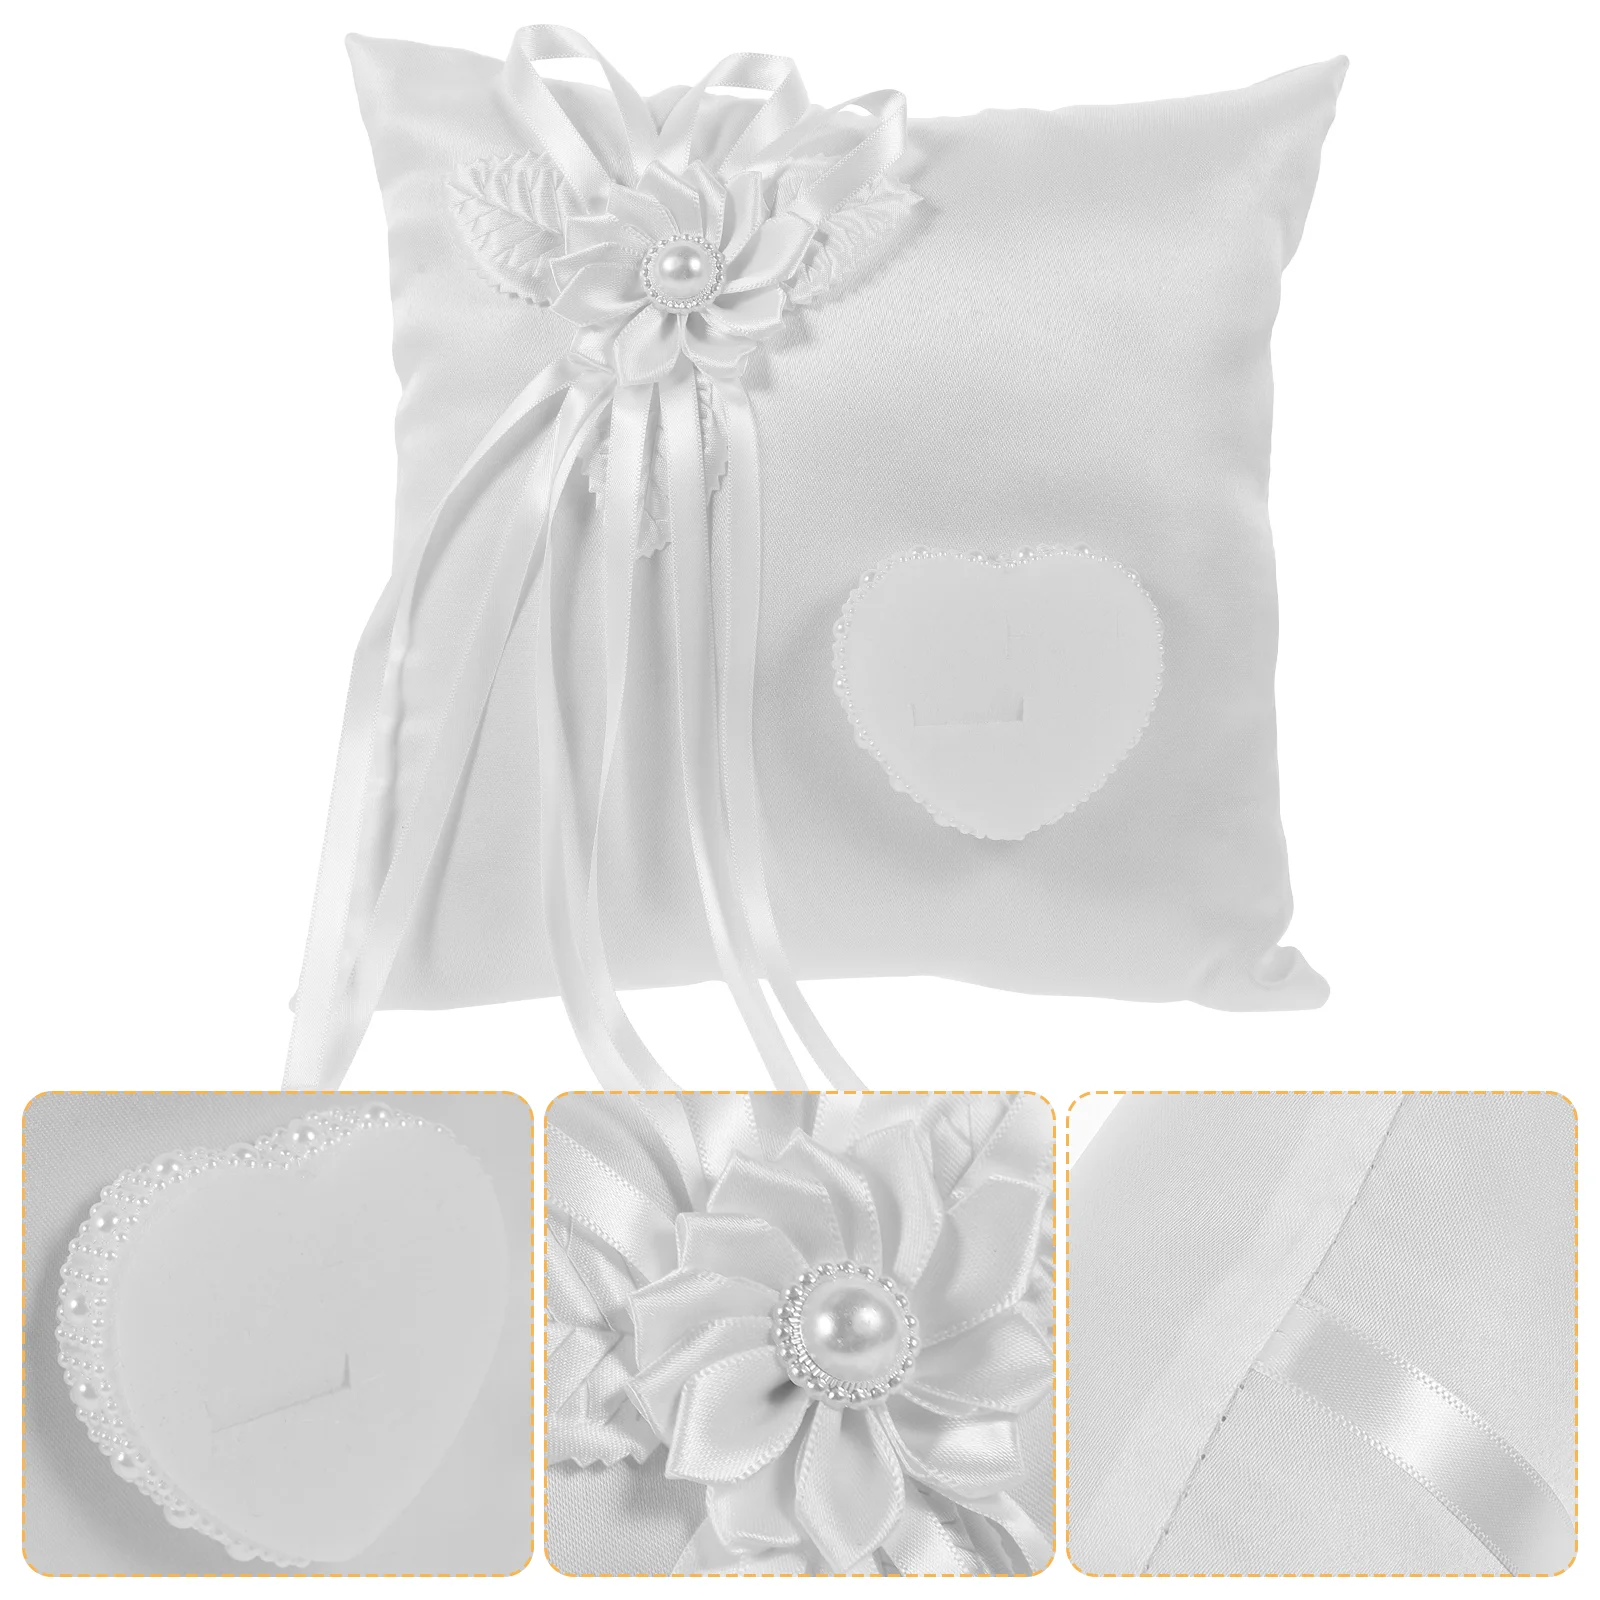 

Ring Pillow Wedding Cushion Heart Shaped Boxes Setting Fabric Bride Floral Pillows